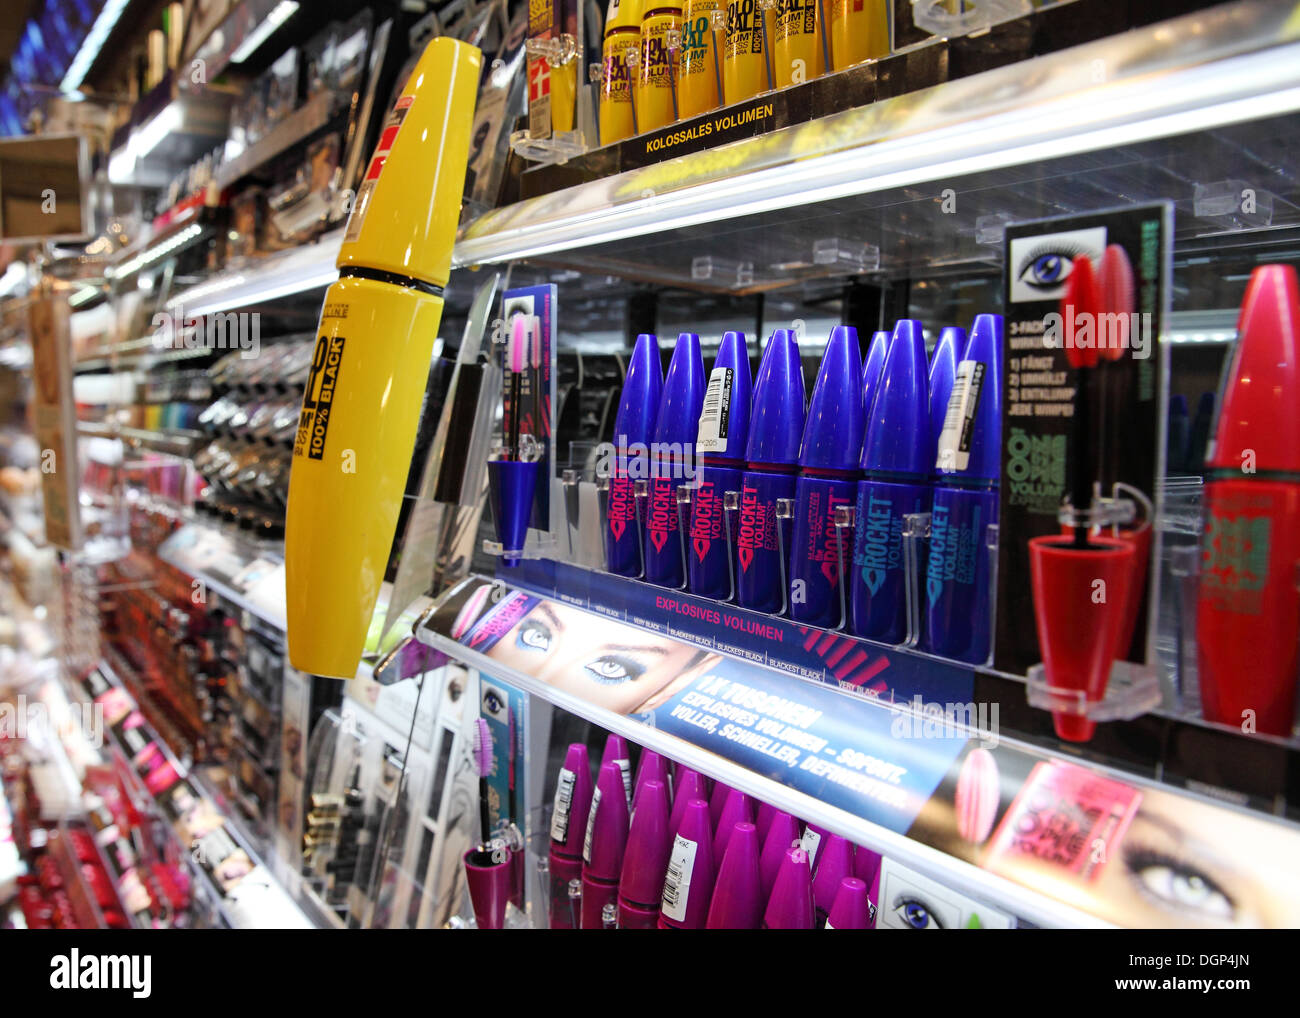 Maybelline Mascara High Resolution Stock Photography and Images - Alamy